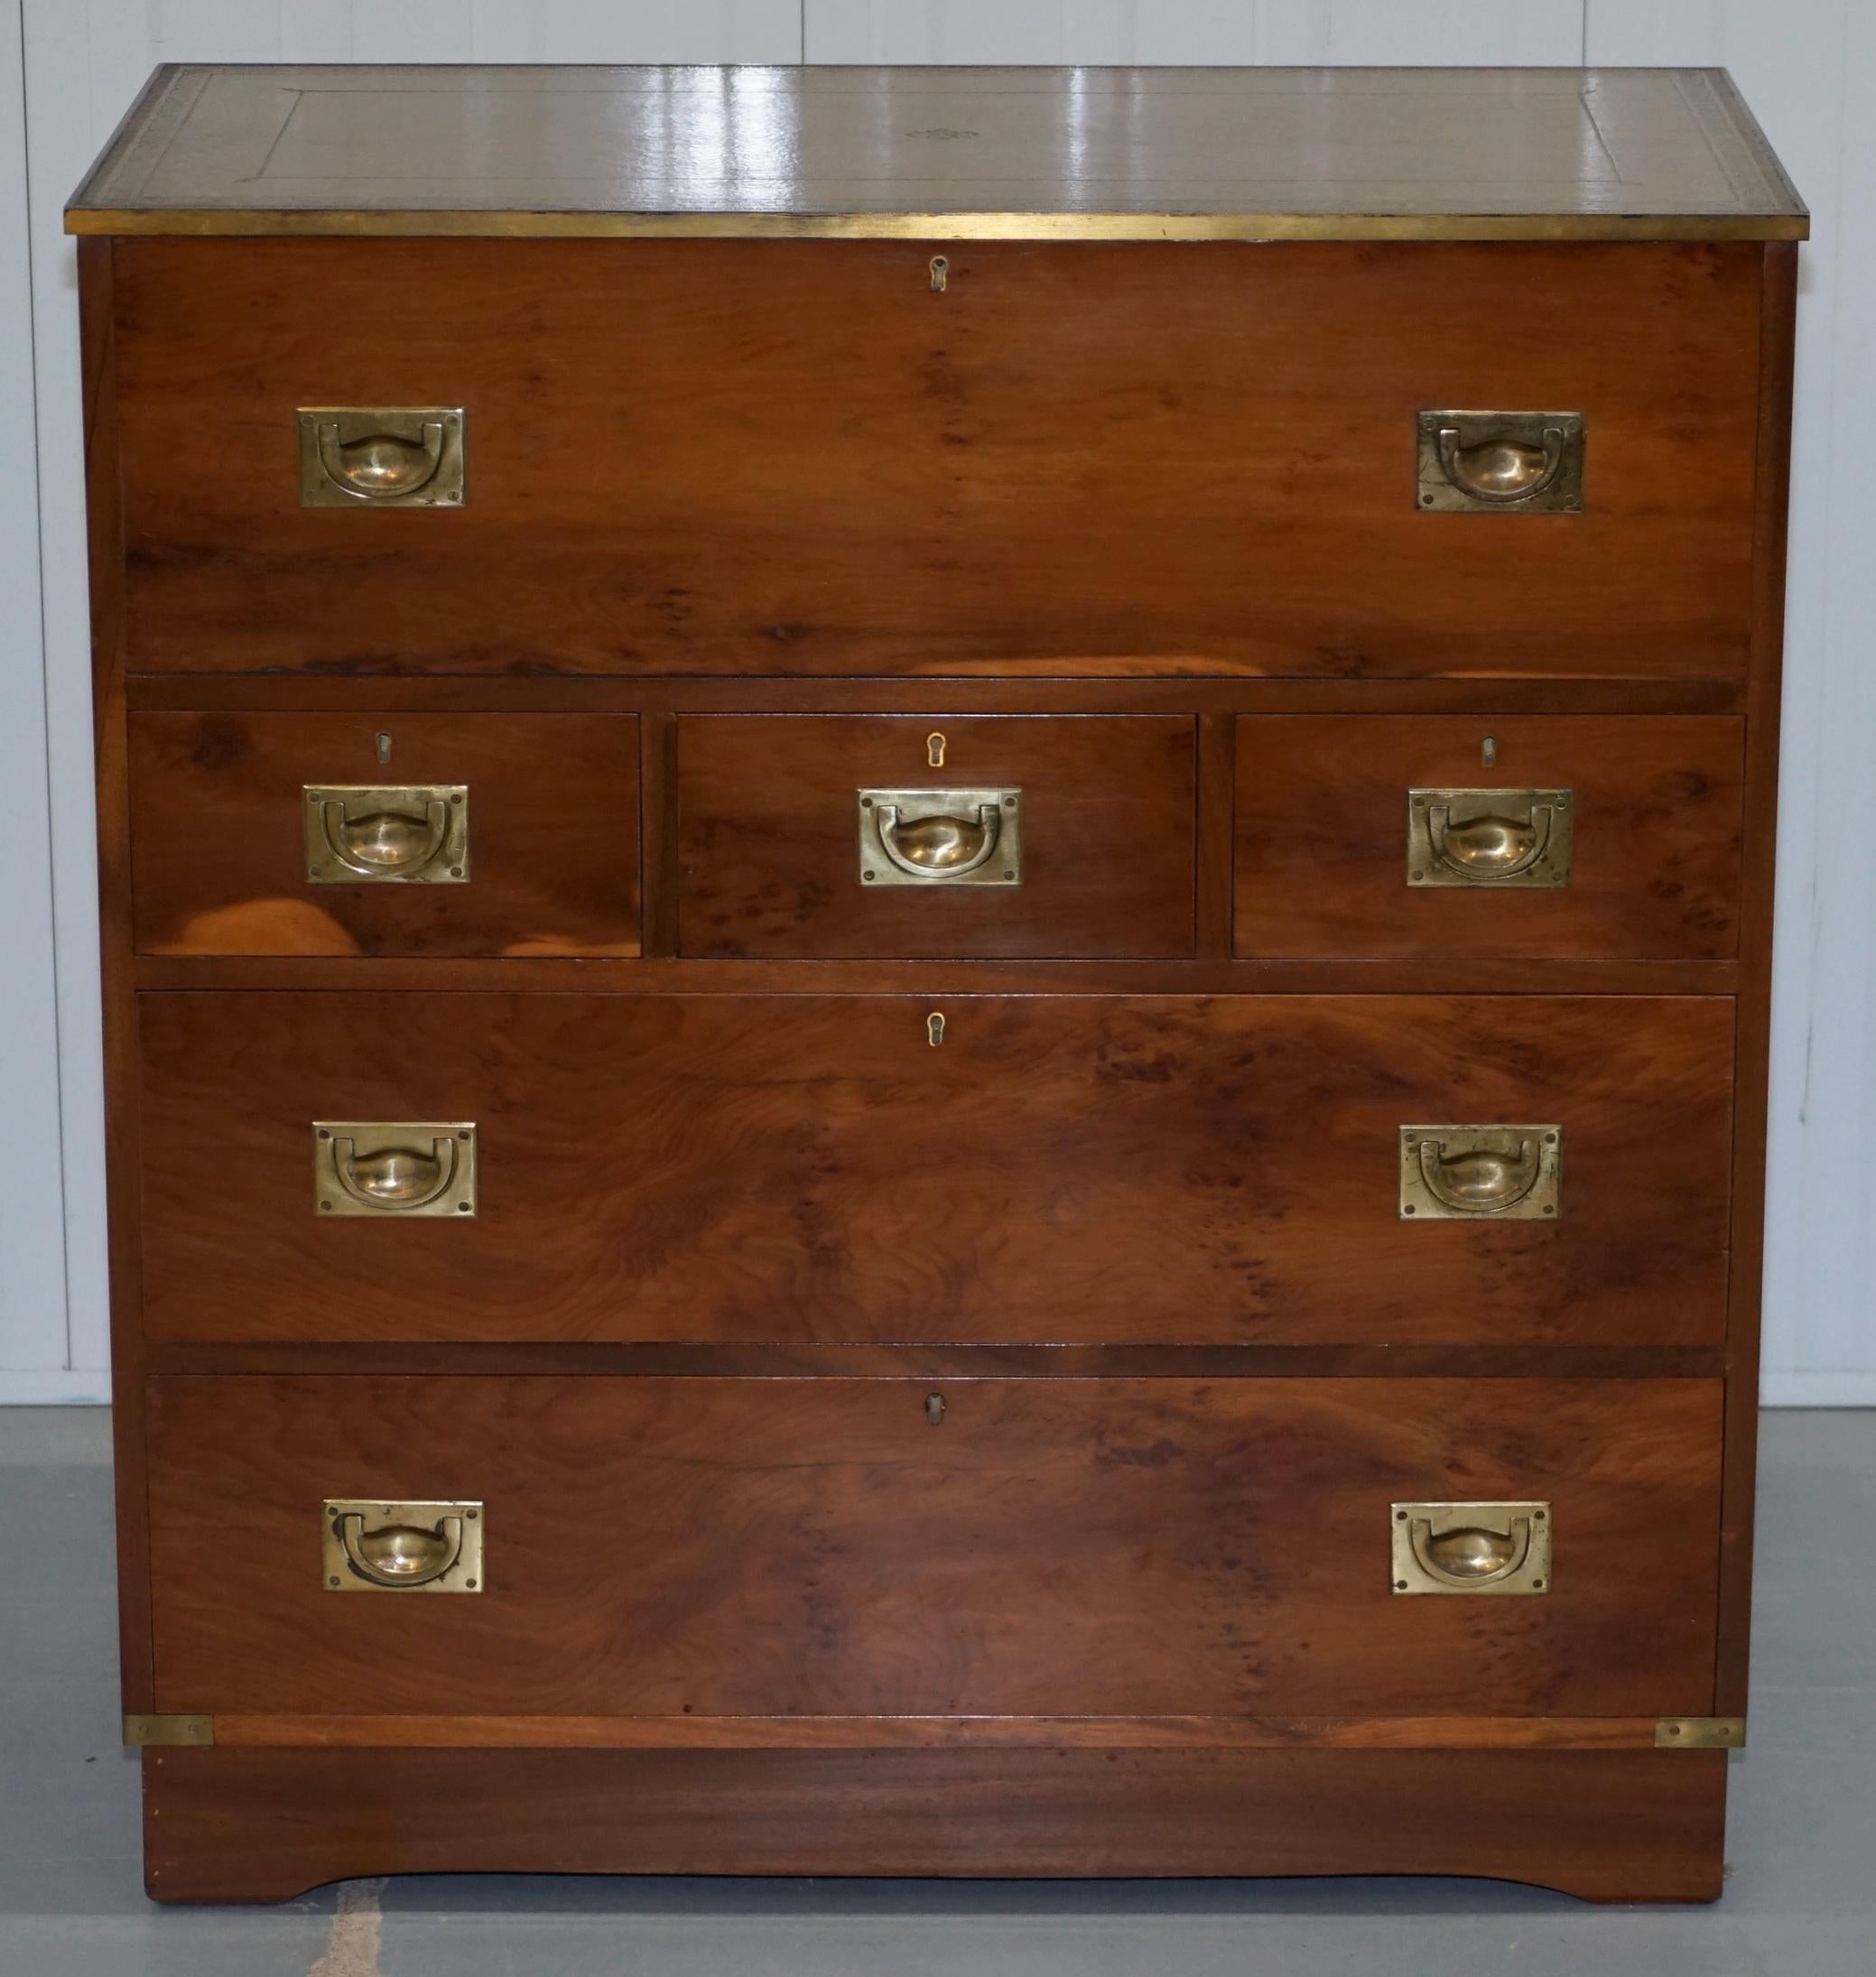 We are delighted to offer for sale this lovely yew wood Military Campaign chest of drawers with leather top and built-in desk bureau section

A very good looking and multifunctional piece, the top is full leather which I've never seen before, its